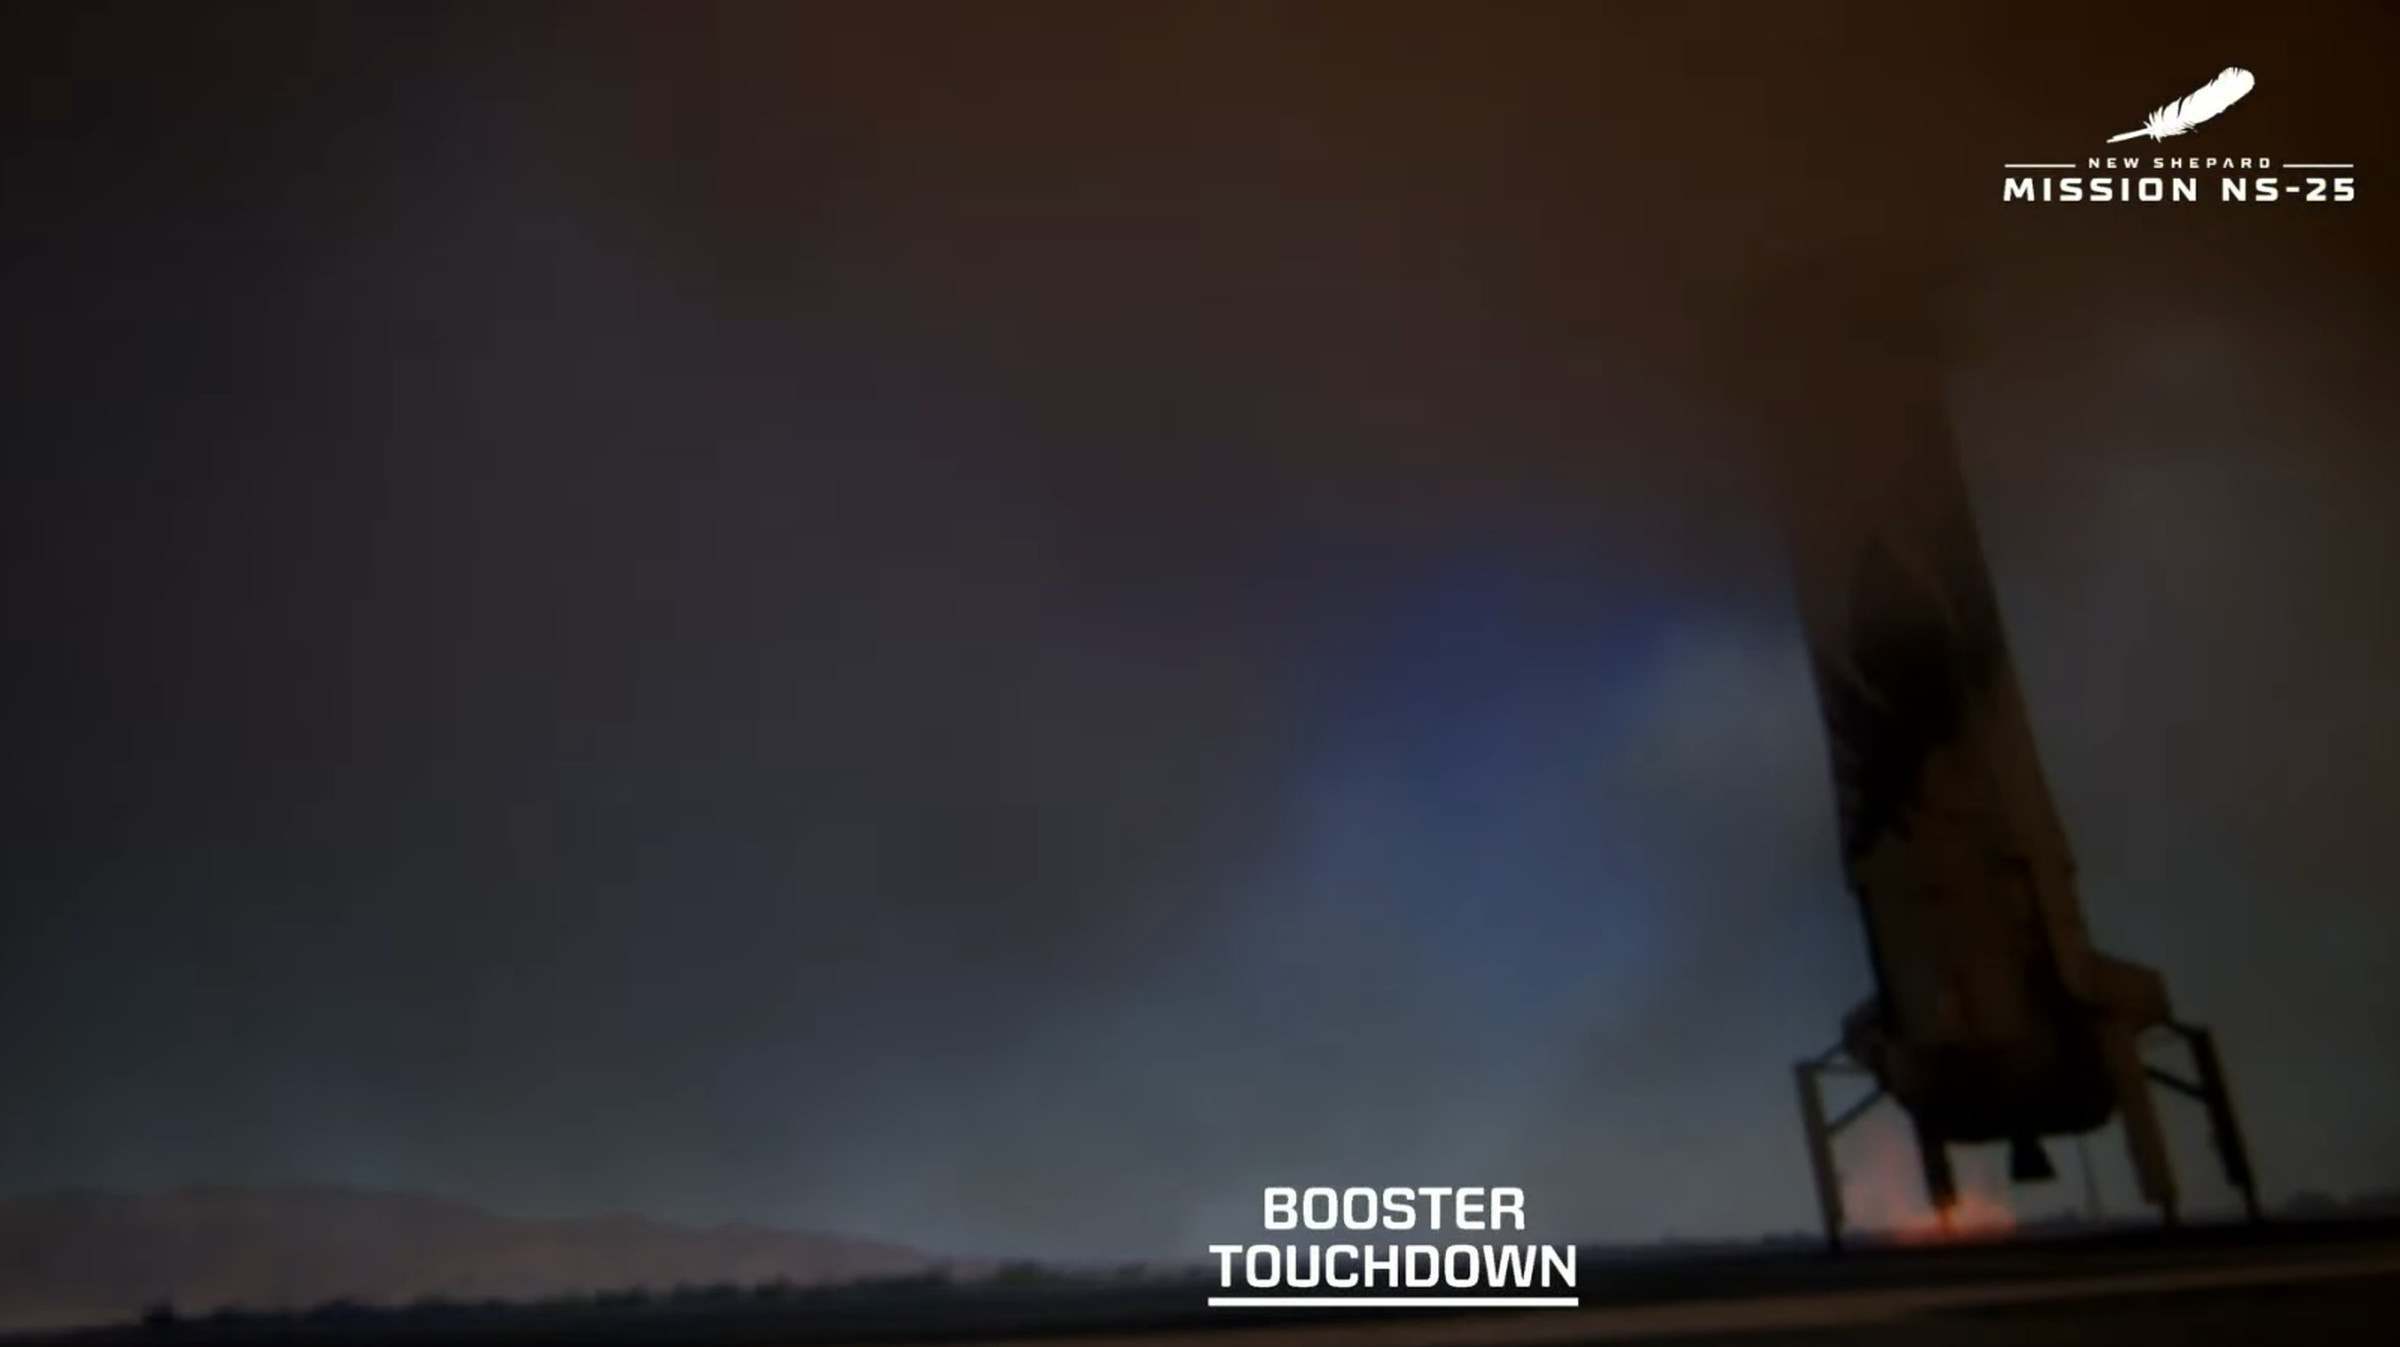 A screenshot showing the Blue Origin booster after setting down, silhouetted in a cloud of dust.